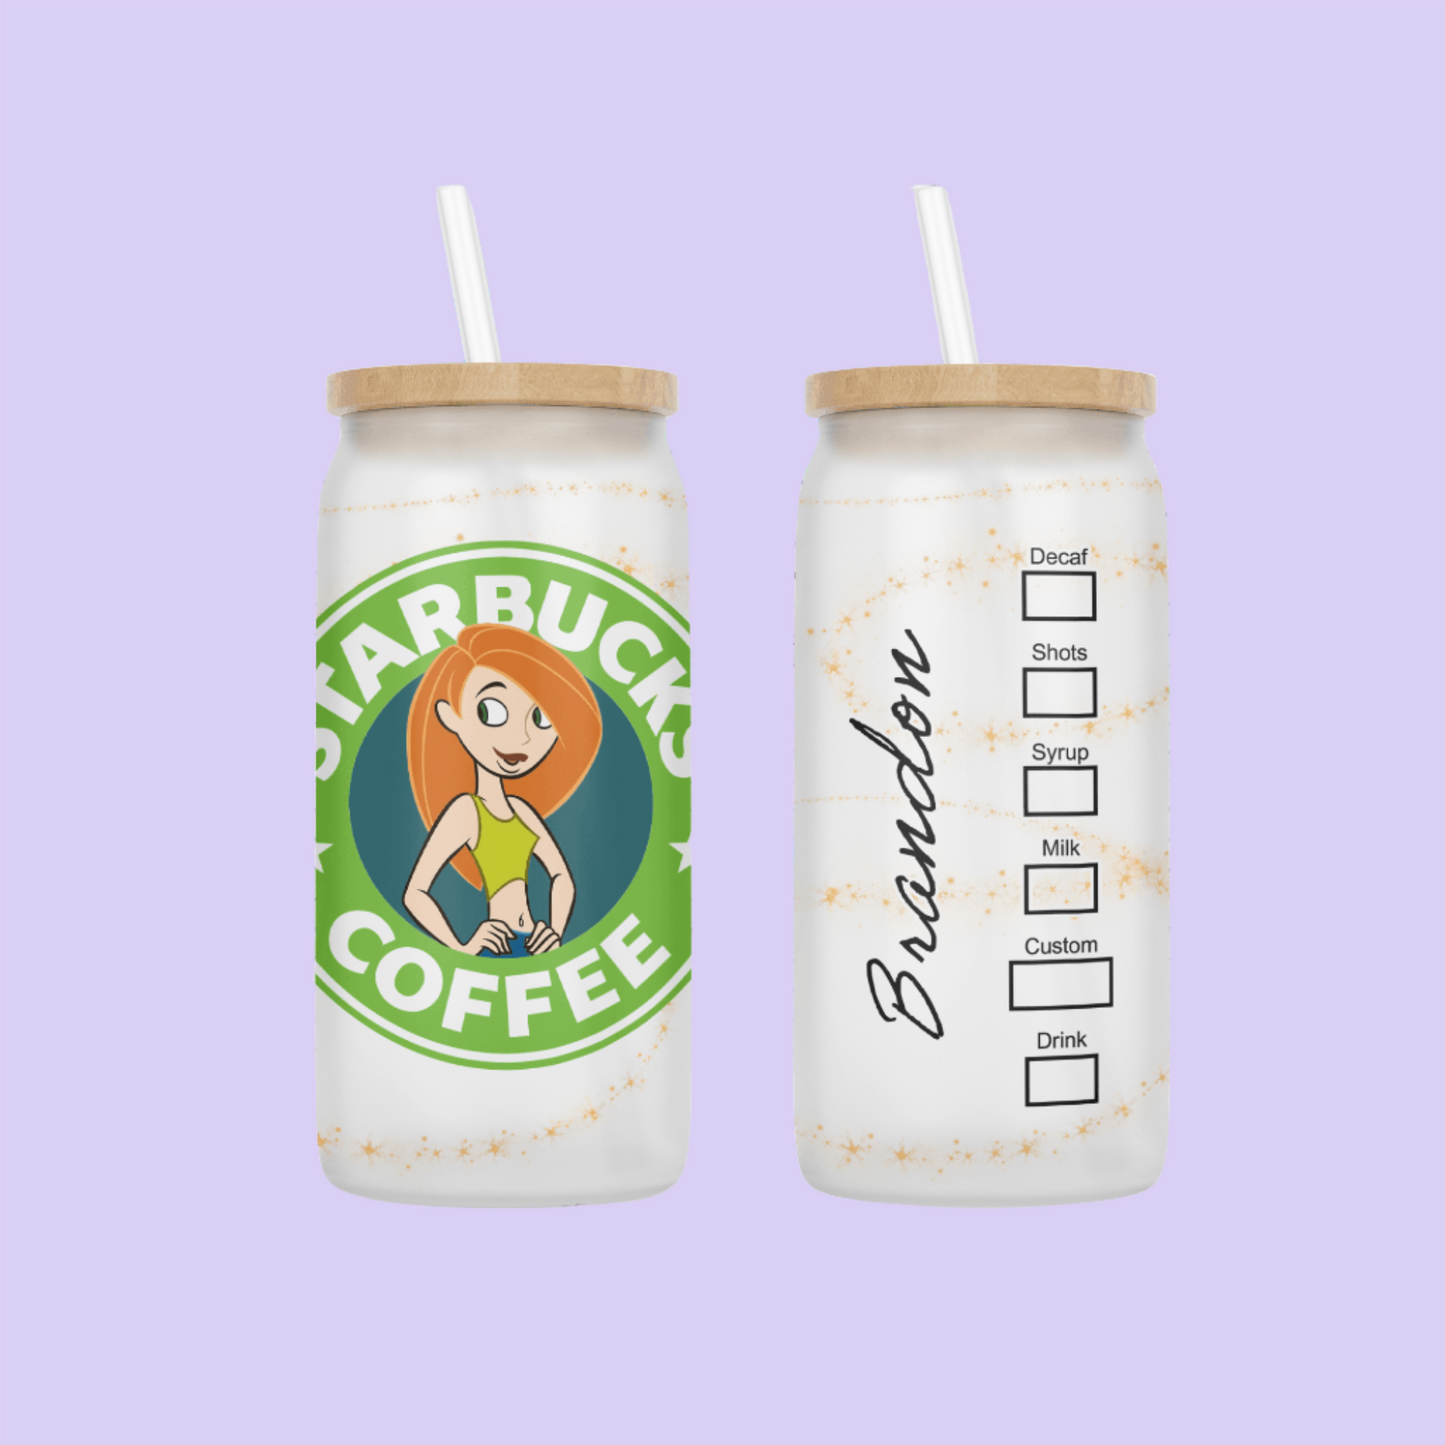 Kimpossible Starbucks Drinking Glass - Two Crafty Gays